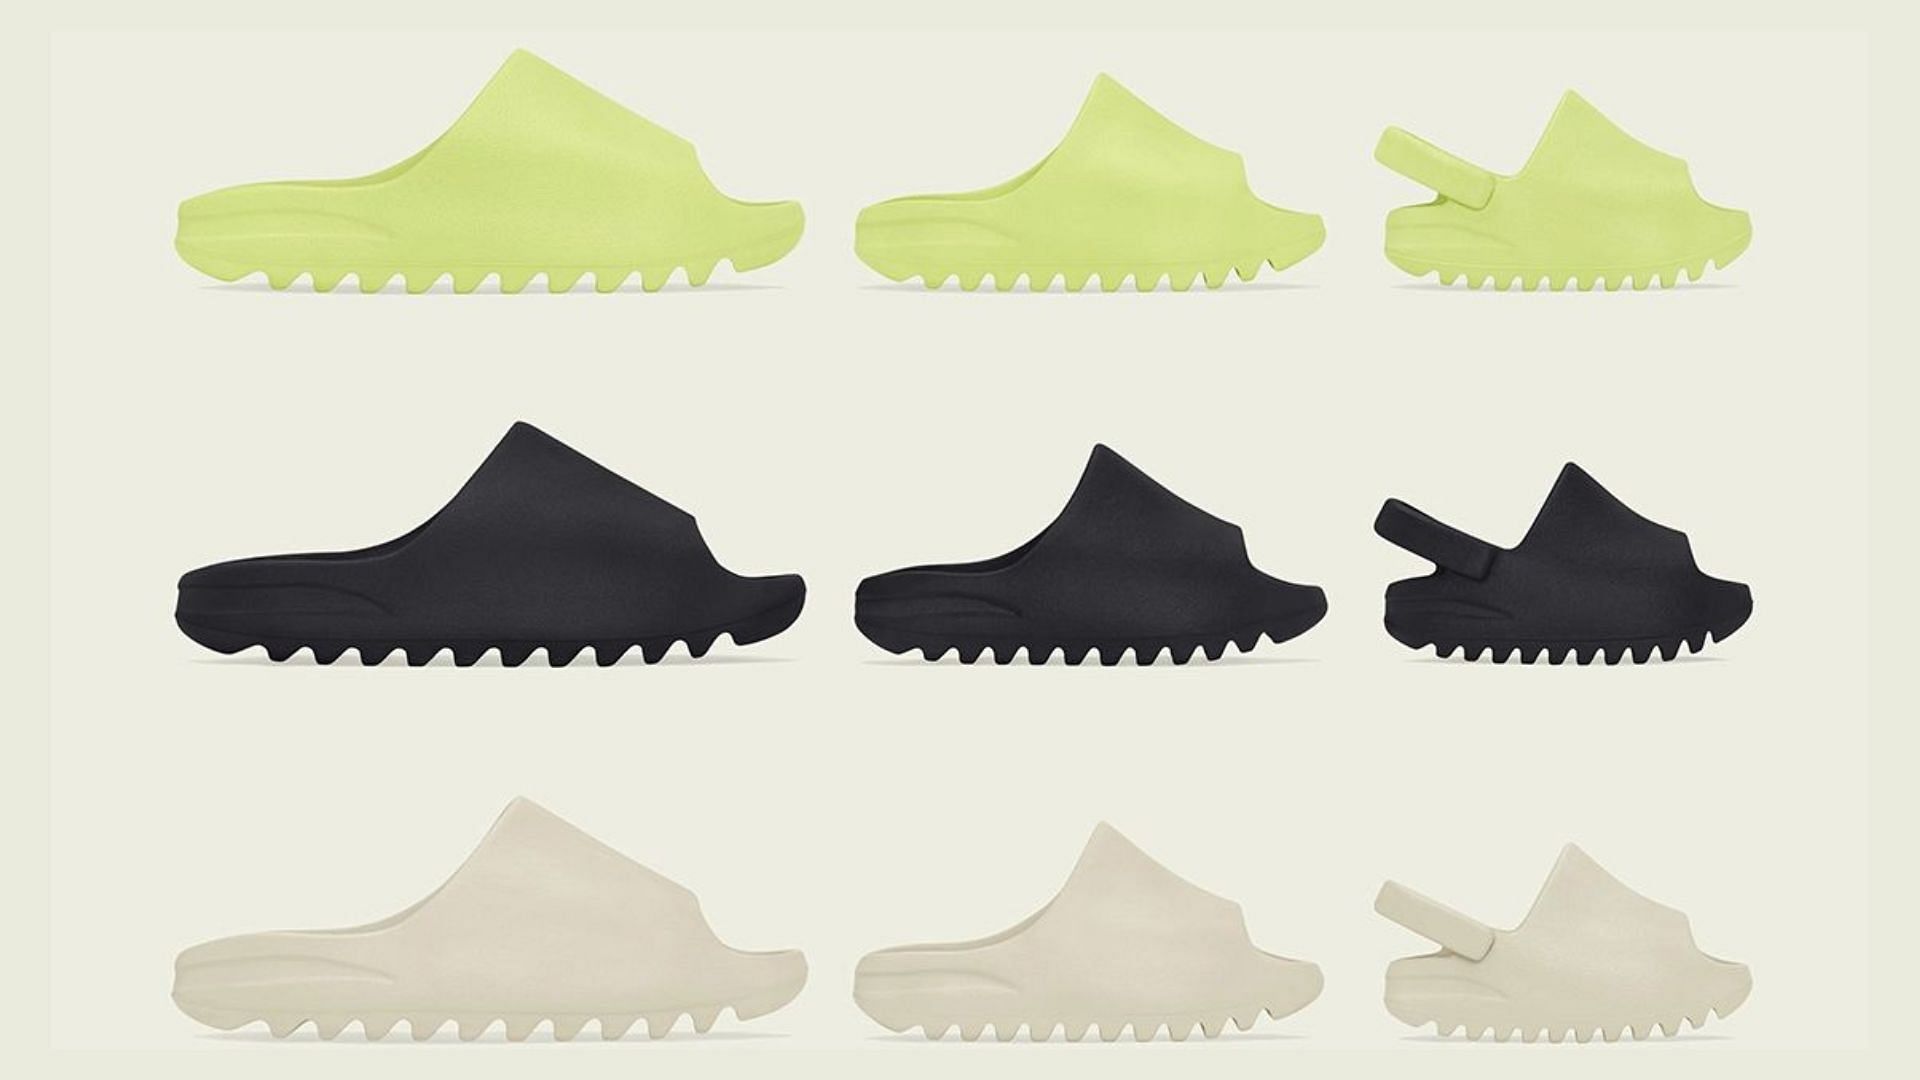 Where to buy Adidas Yeezy Slides? Price, release date, and more details